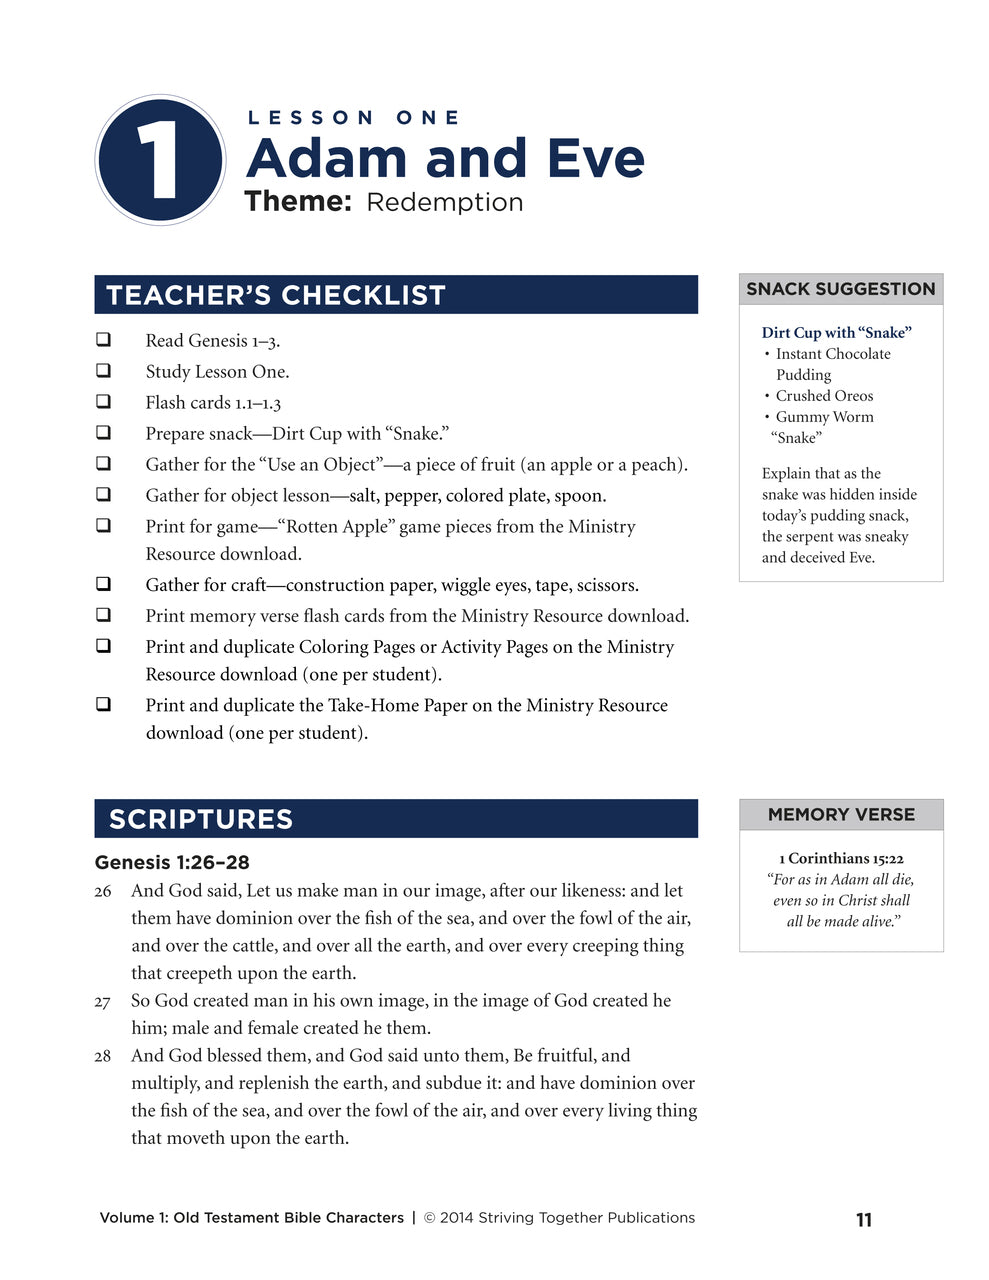 Stories of Grace: Old Testament Bible Characters Teacher Edition Download